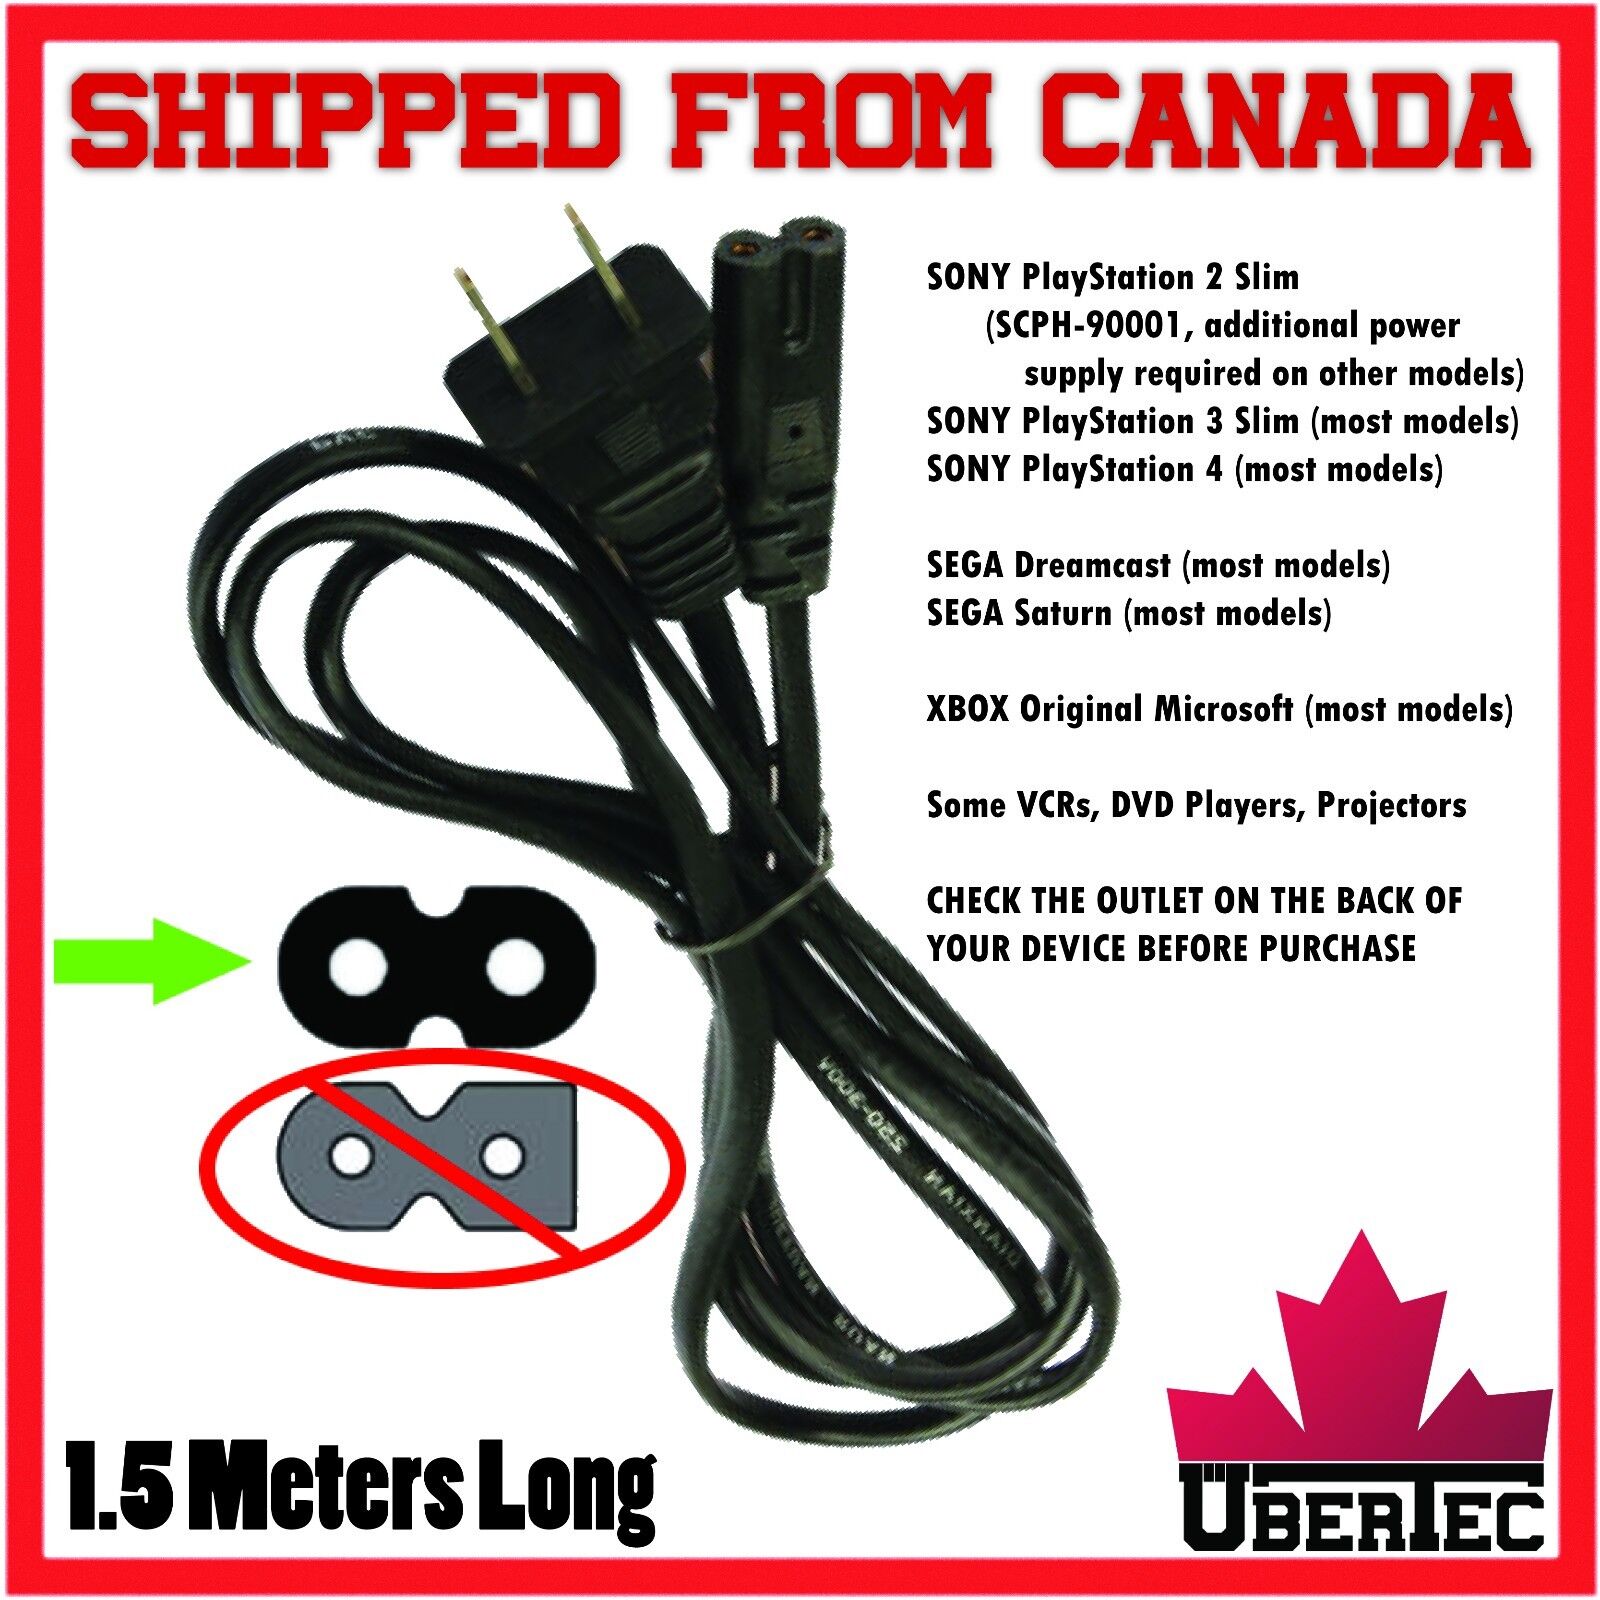 *Brand NEW* Power Cable Cord 2-Prong 8 Style For PS2 PS3 PS4 XBox Sega Dreamcast Saturn